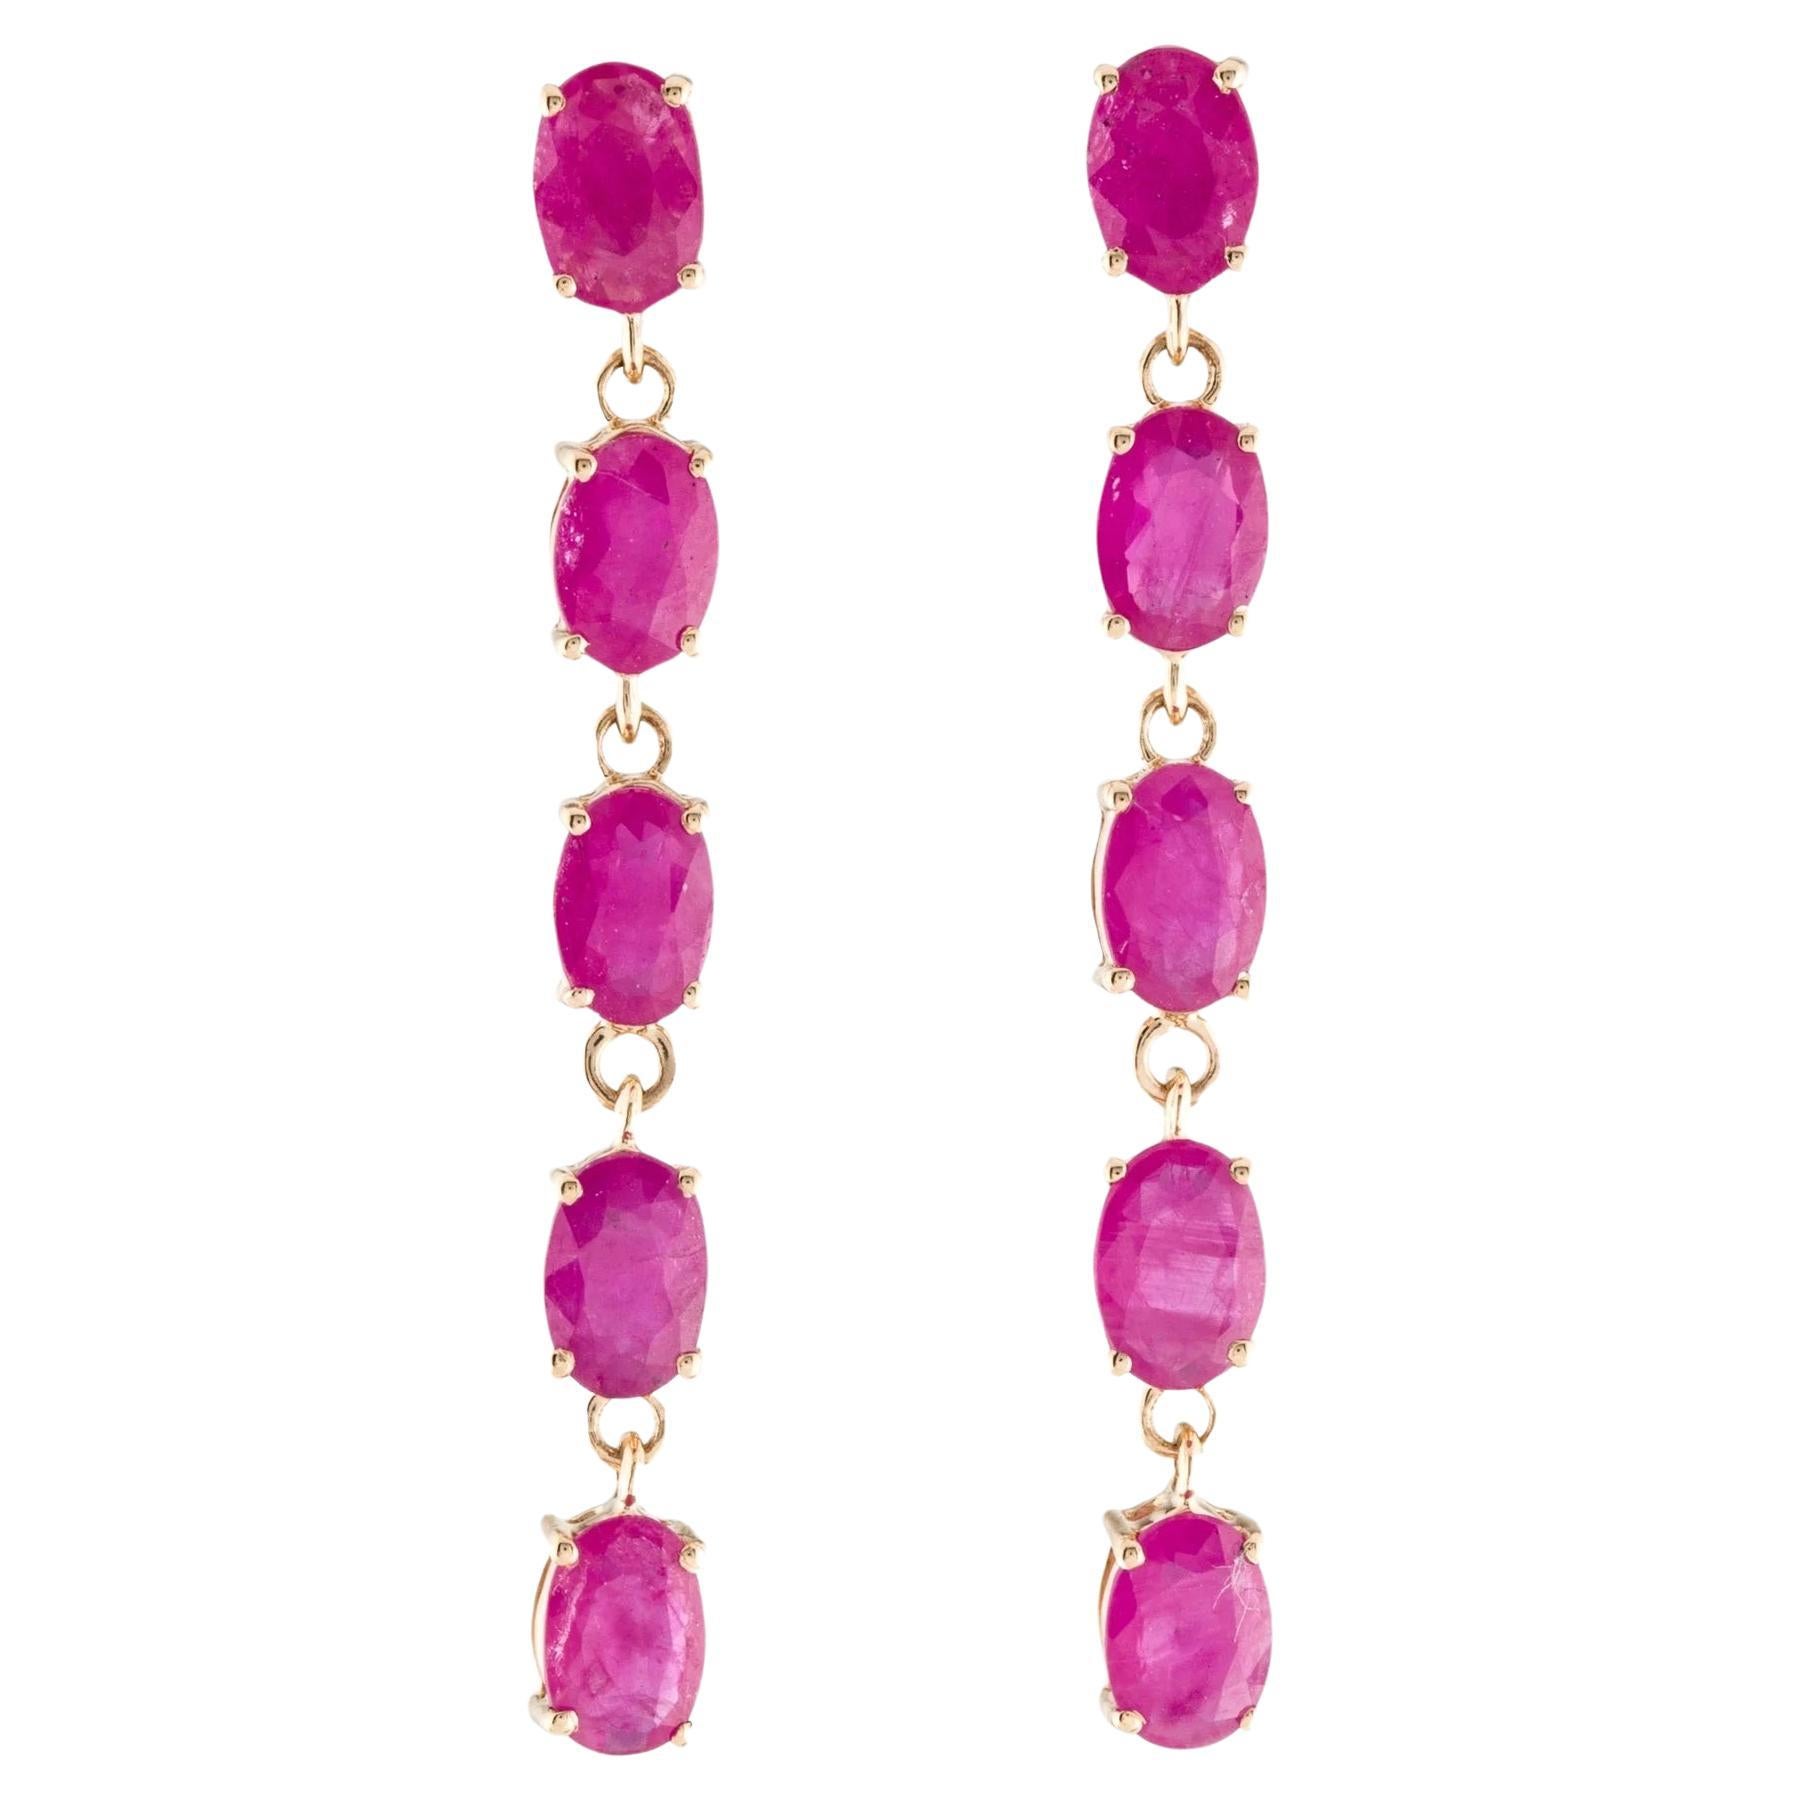  Stunning 14K Yellow Gold Earrings with 4.00 Carat Oval Ruby For Sale